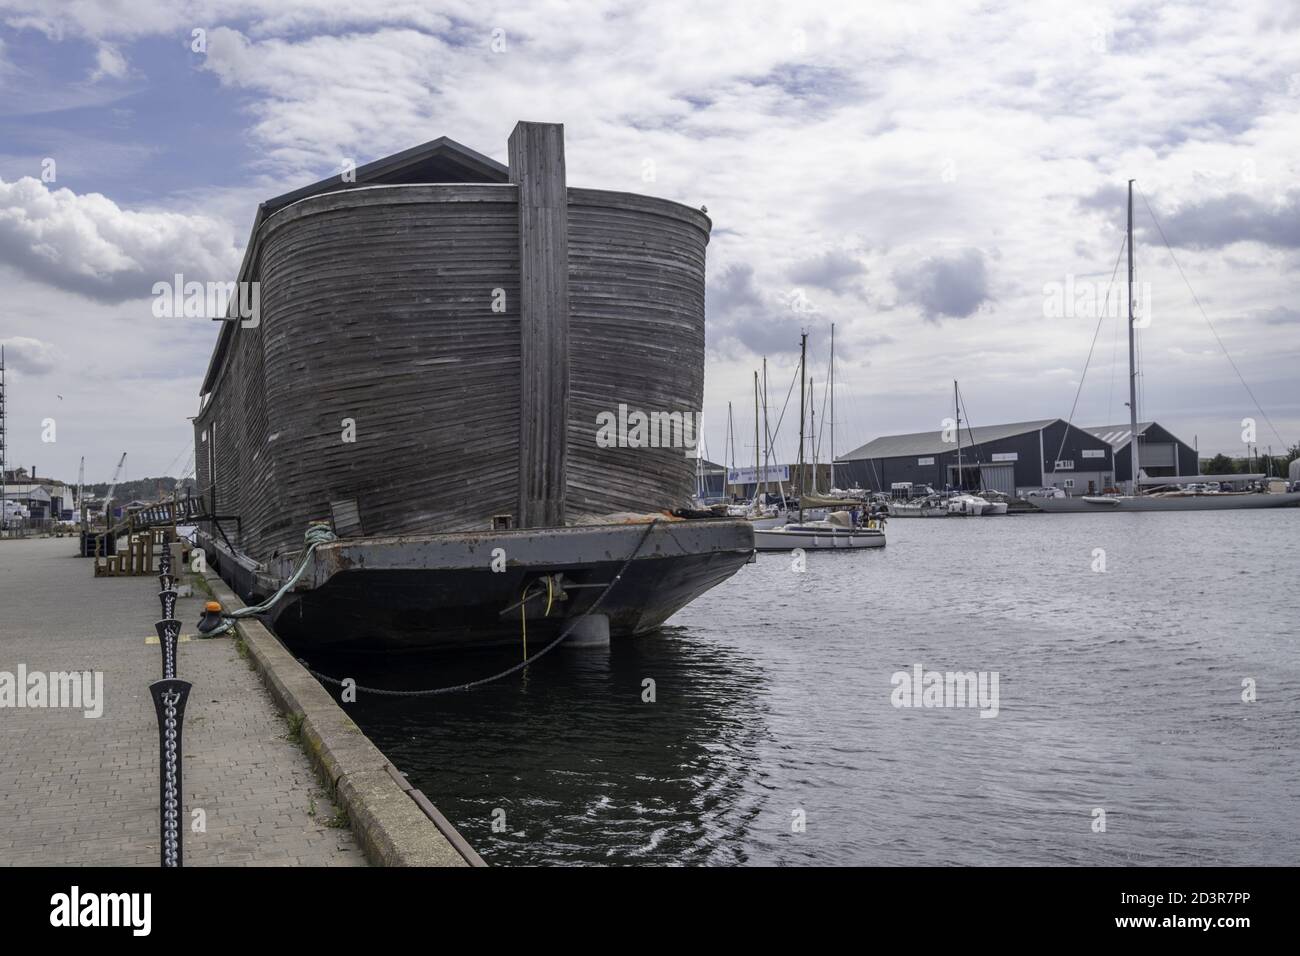 IPSWICH, UNITED KINGDOM - Aug 04, 2020: Noah's Ark, which is in Ipswich Haven Marina. It is a museum featuring wooden sculptures that tell bible stori Stock Photo